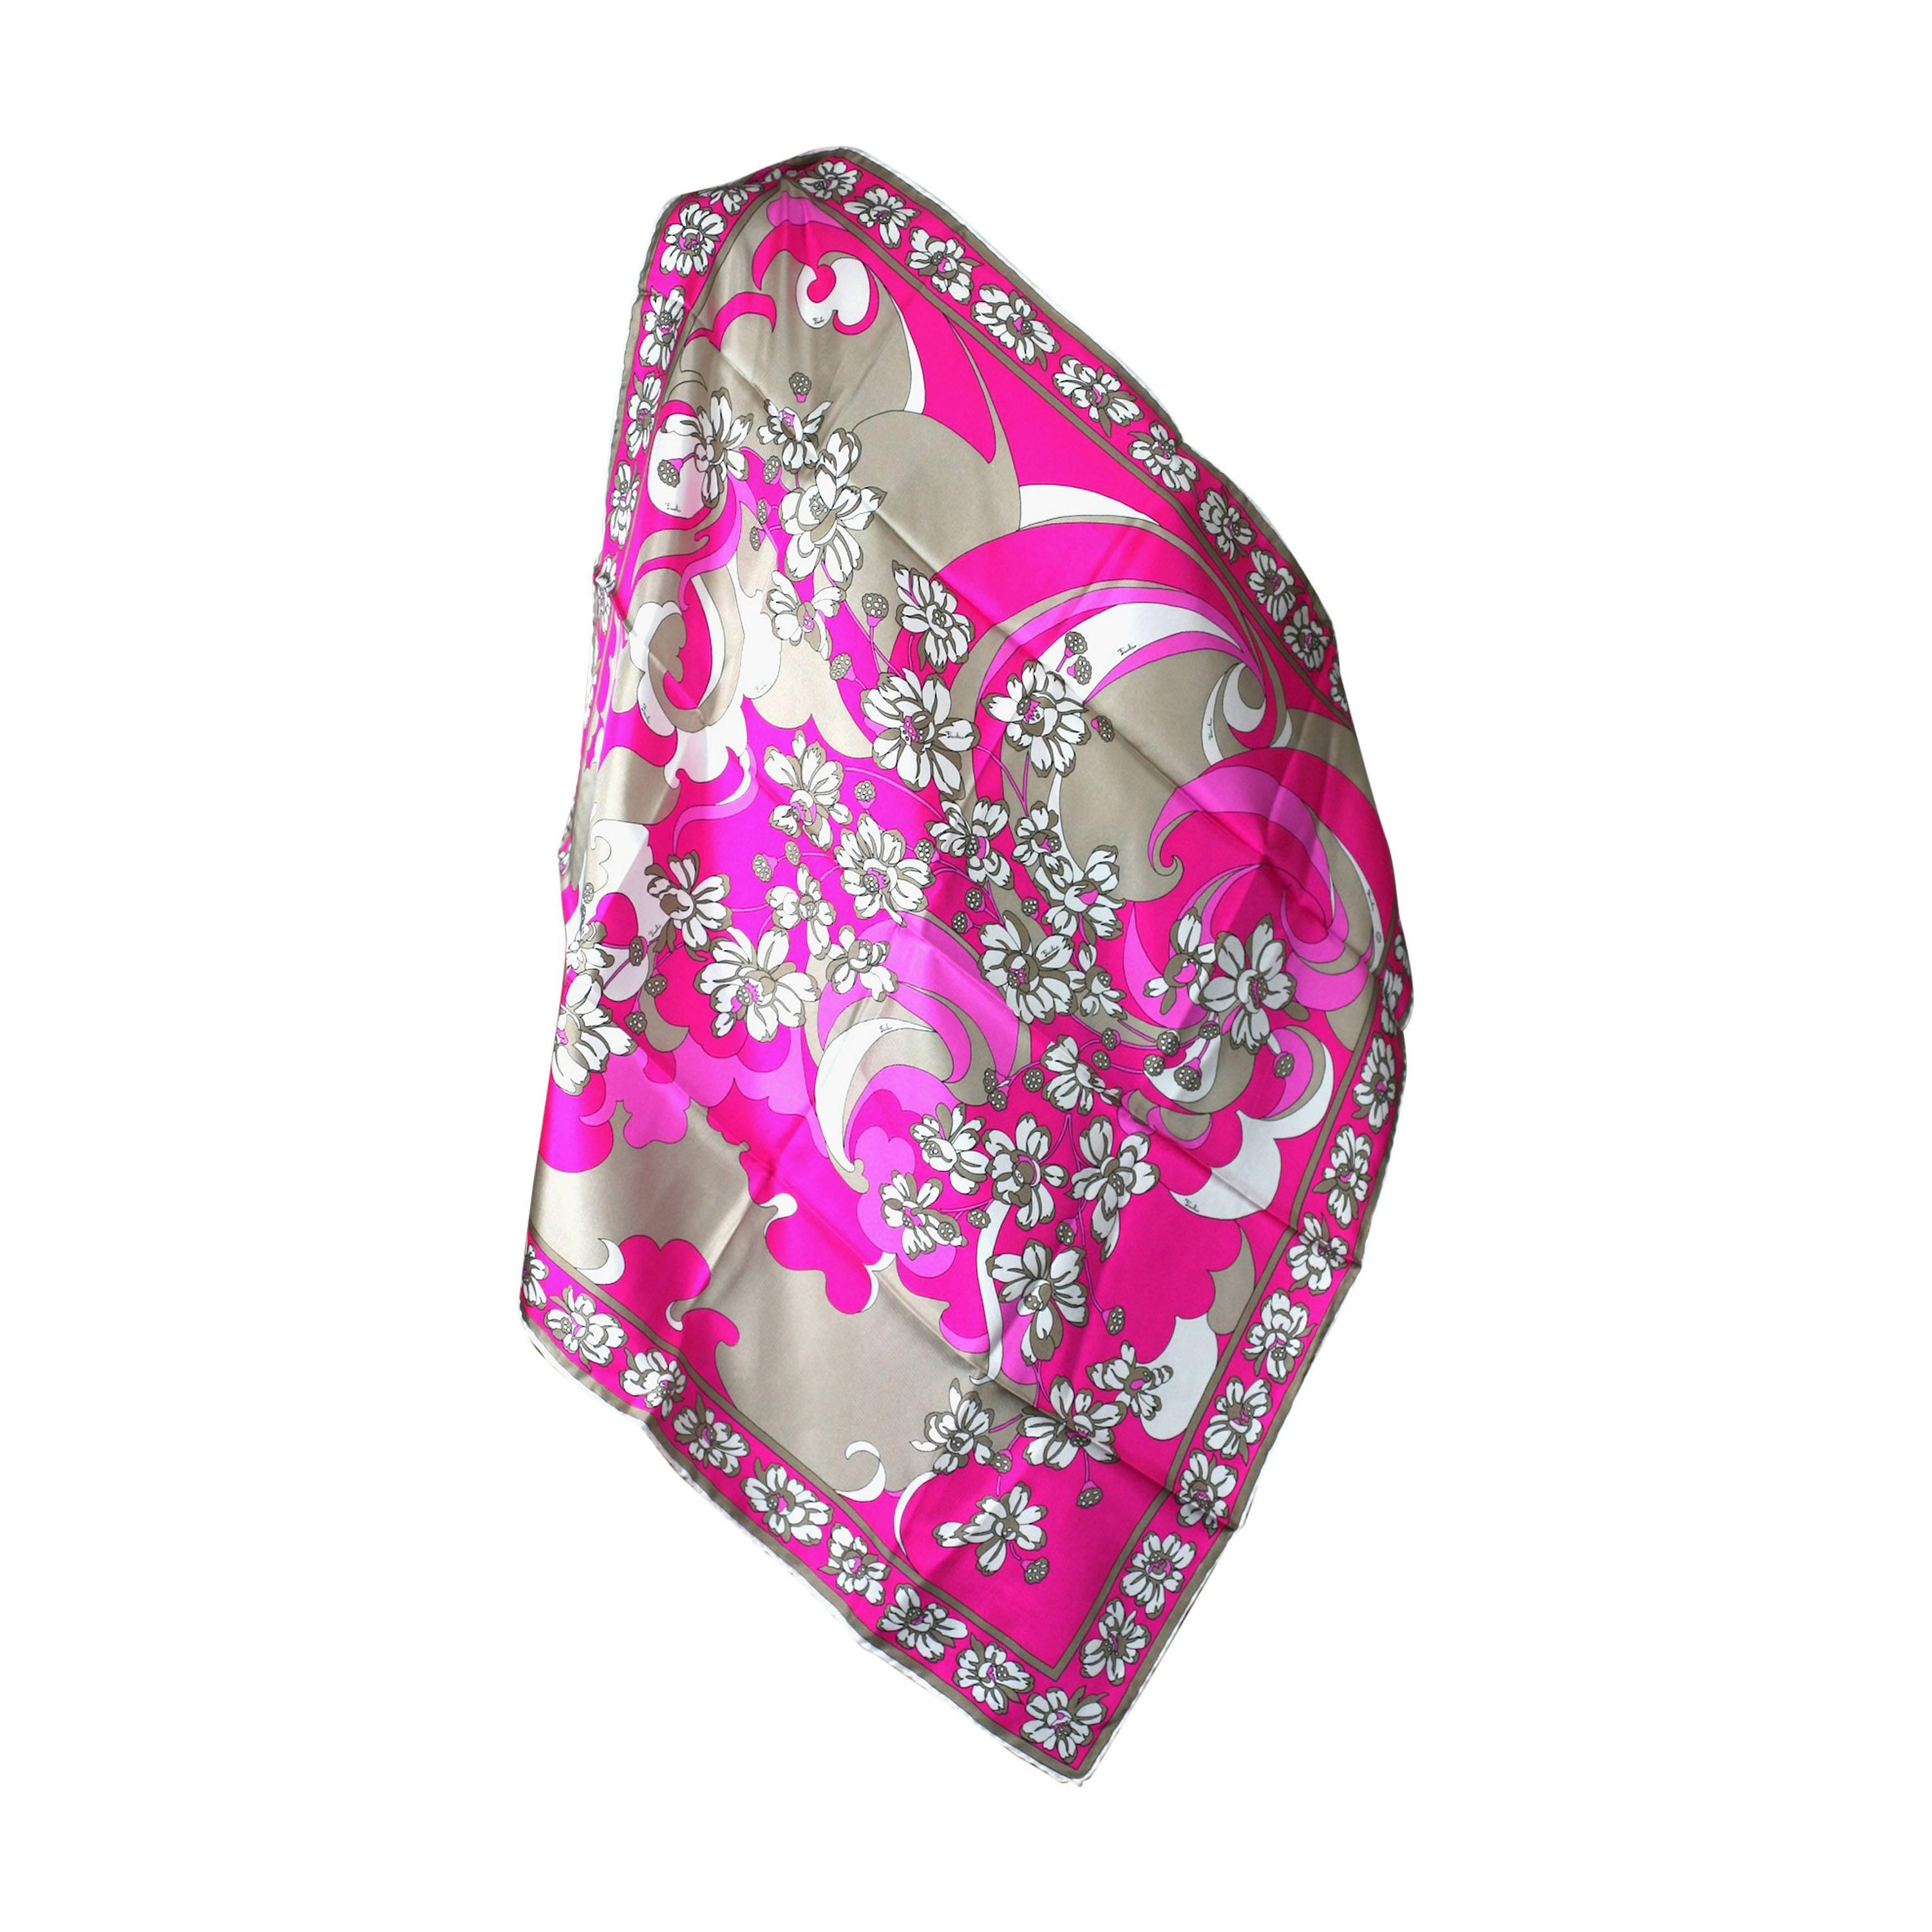 Emilio Pucci Hot Pink Floral Scarf